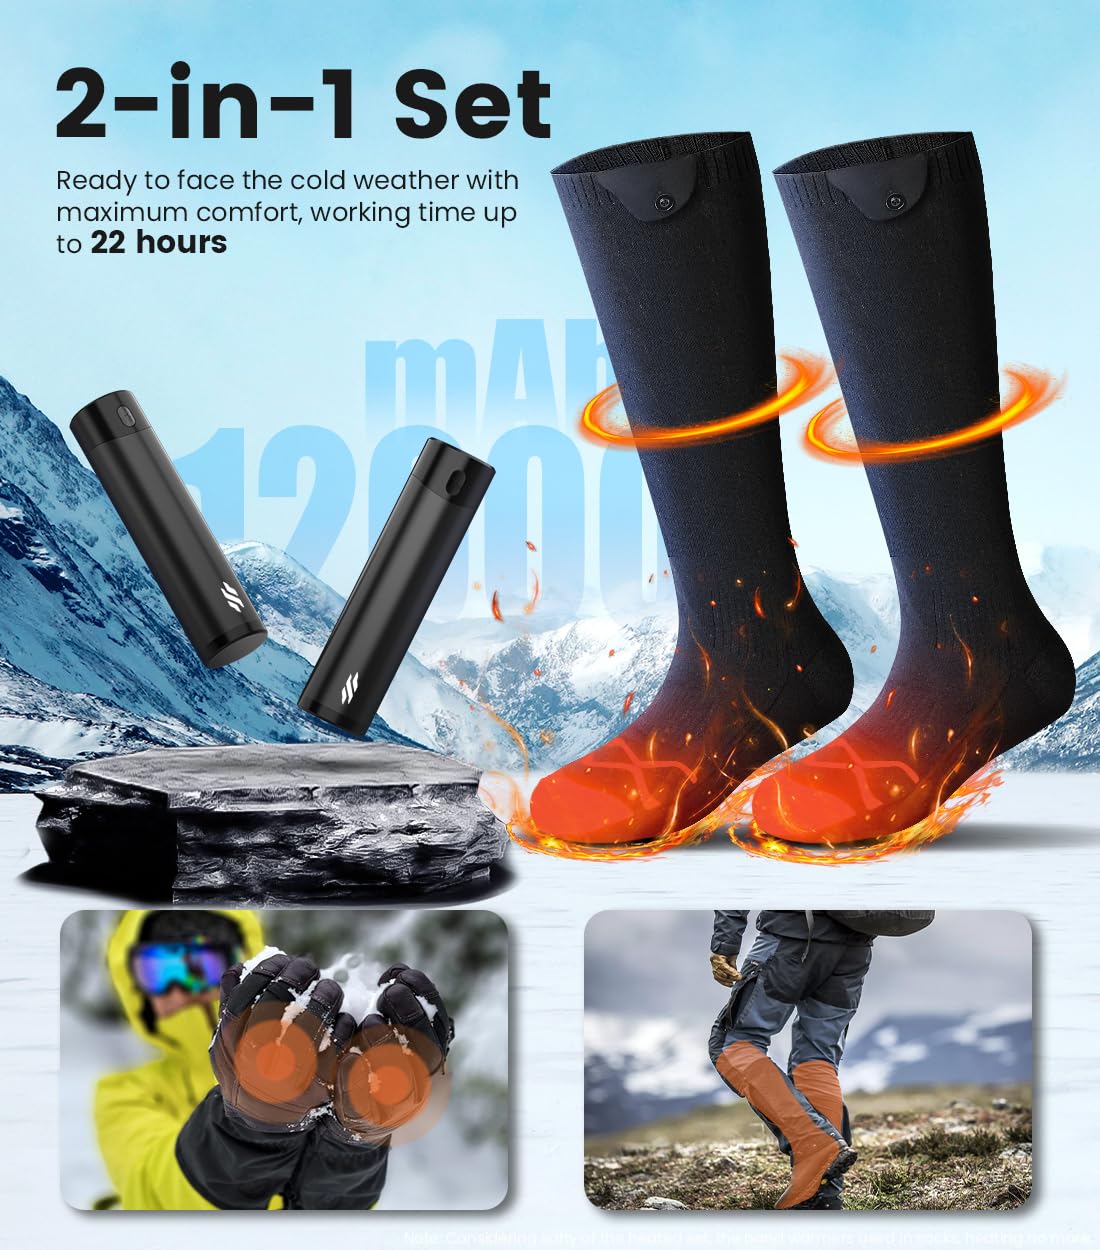 Heated Socks and Hand Warmers for Men Women - 2 Packs 6000mAh 7.5V Electric Foot Warmers - Battery Thermal Socks - Gifts for Hunting, Fishing, Skiing and Outdoor - Christmas Stocking Stuffers